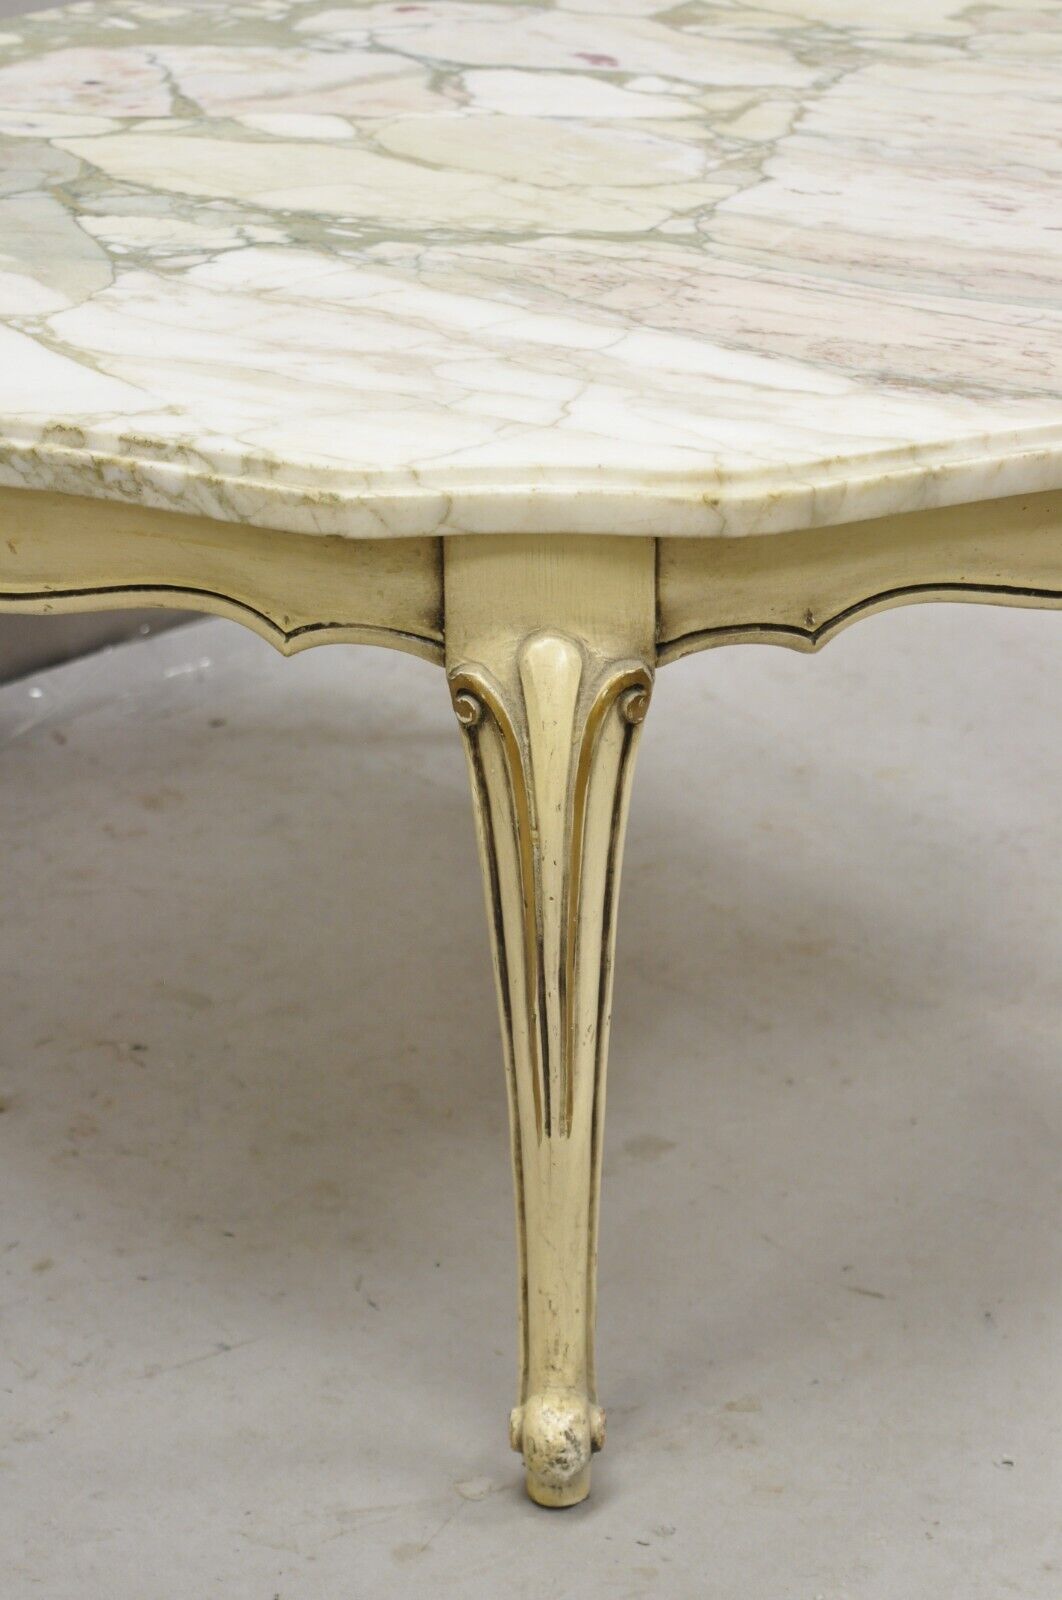 Vintage French Provincial Style Marble Top Cream Painted Round Coffee Table